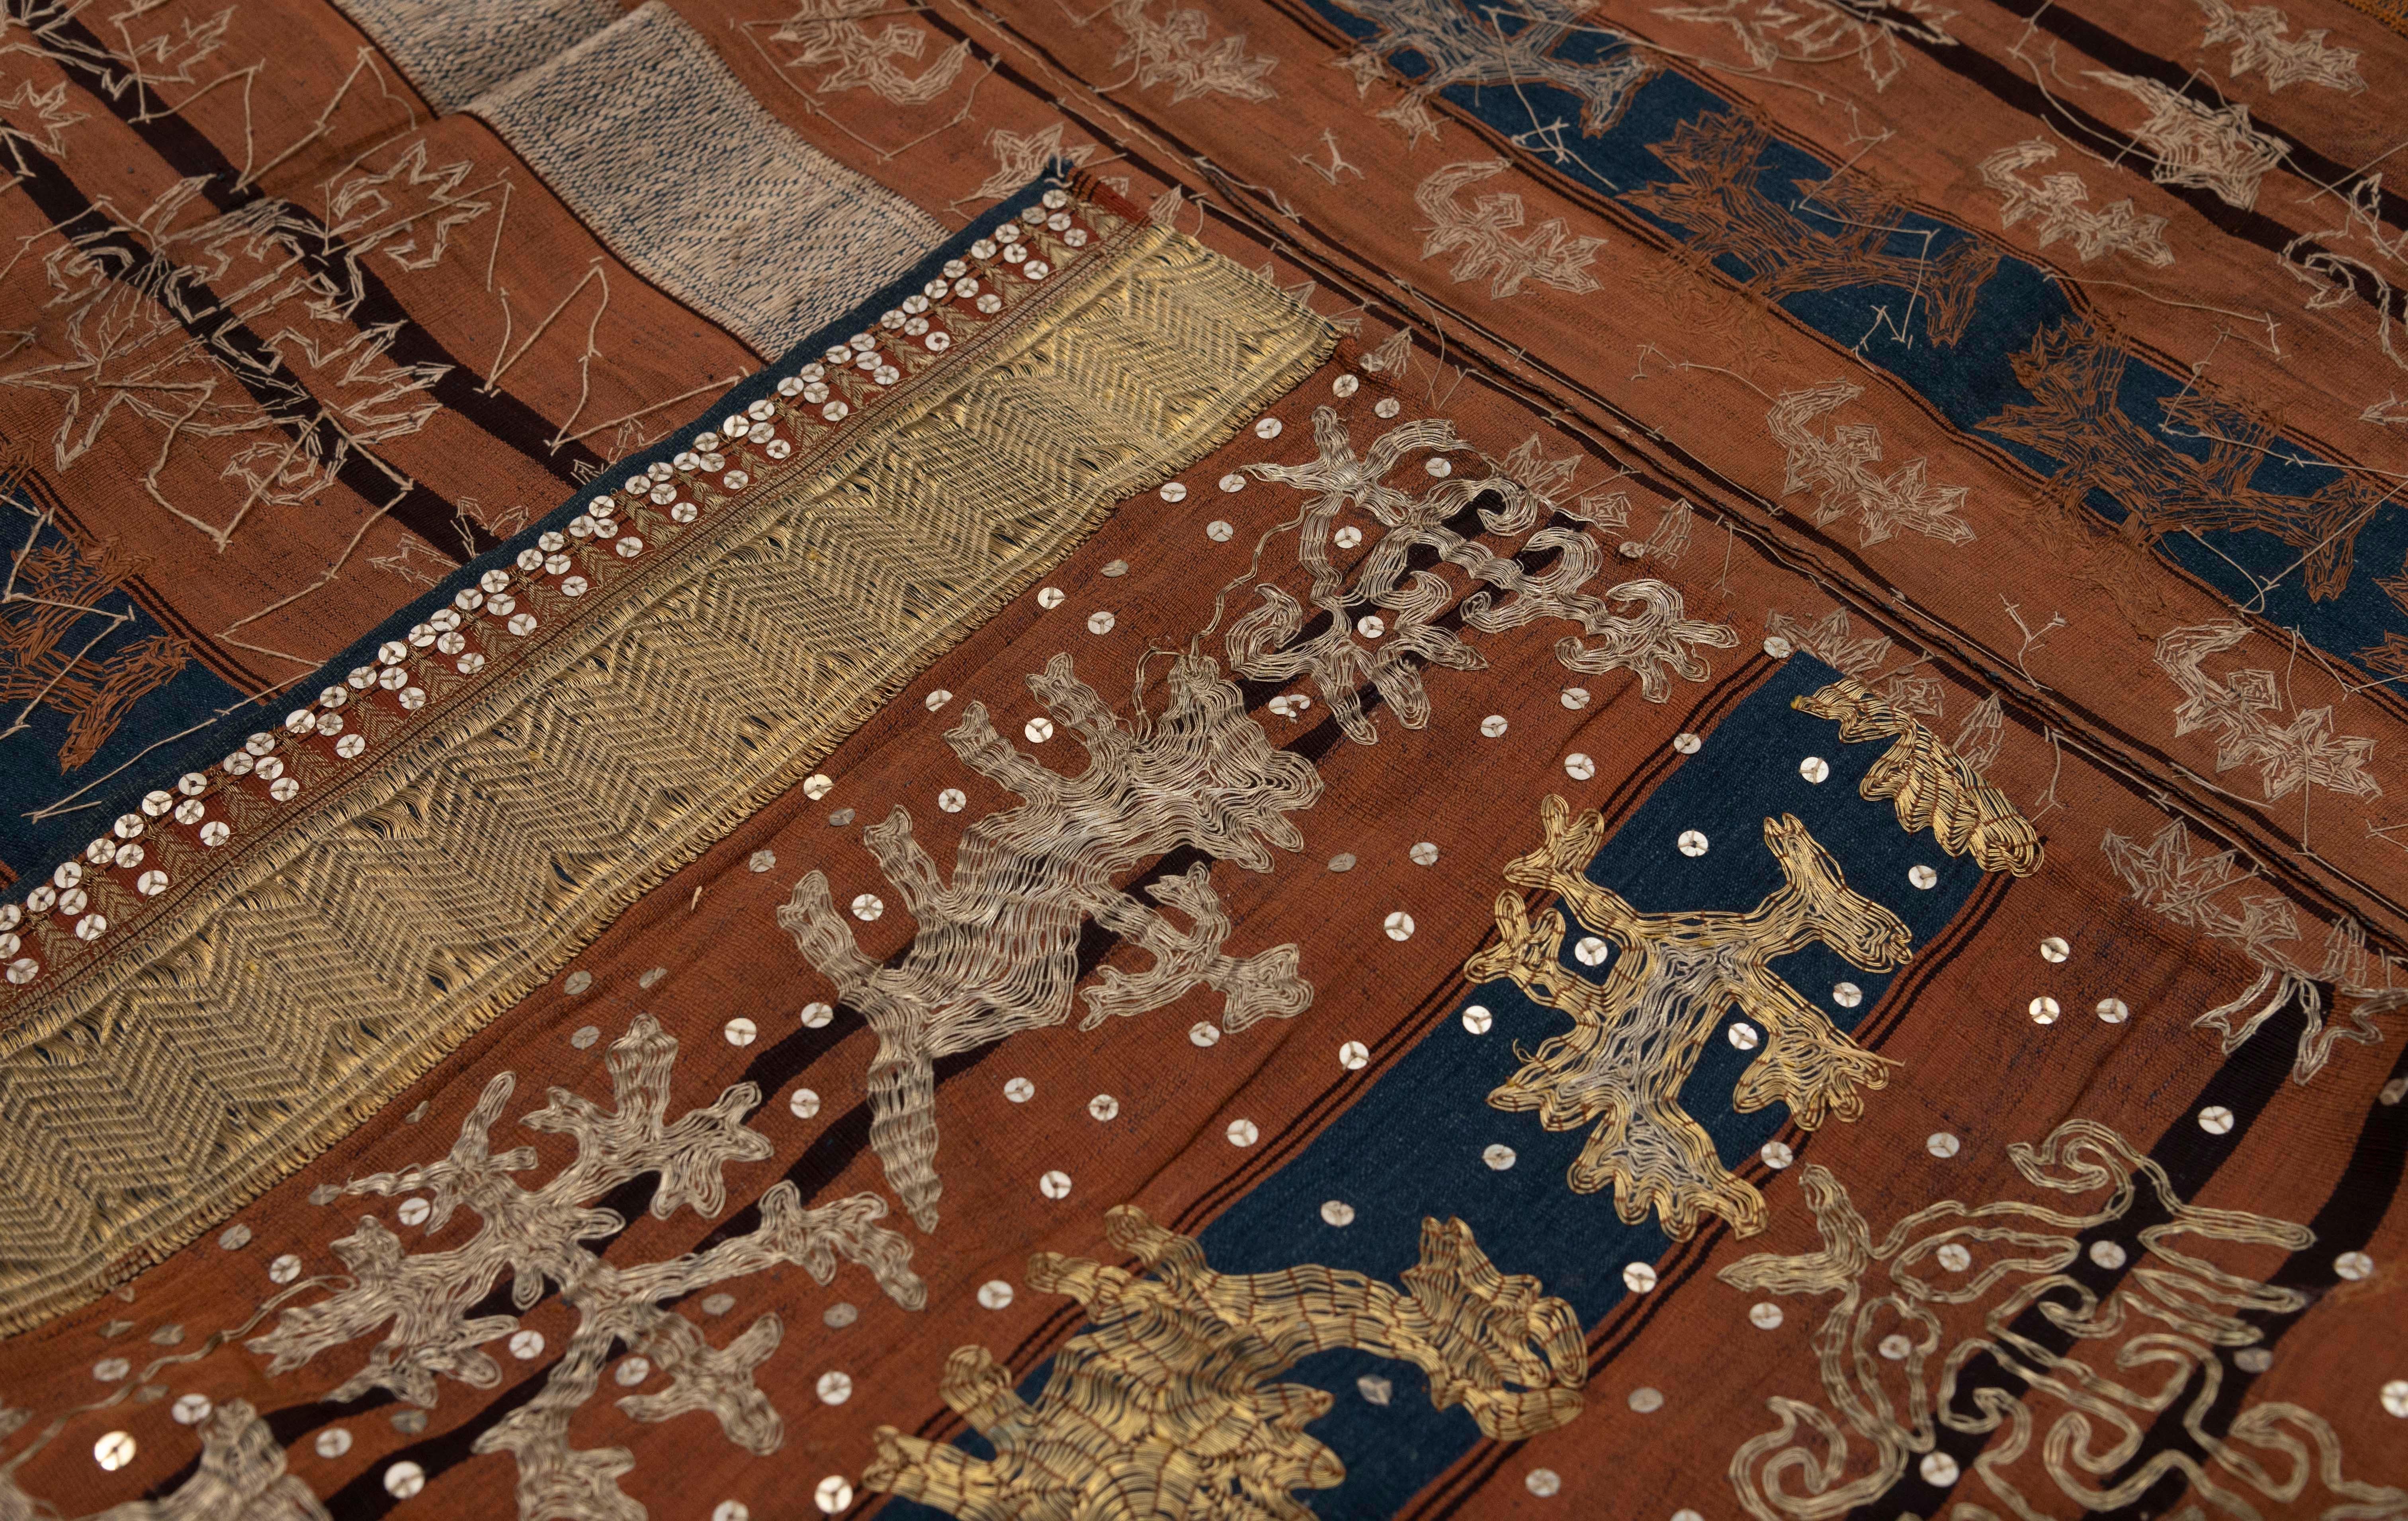 Modern Ceremonial Cloth 'Tapis' of Lampung For Sale